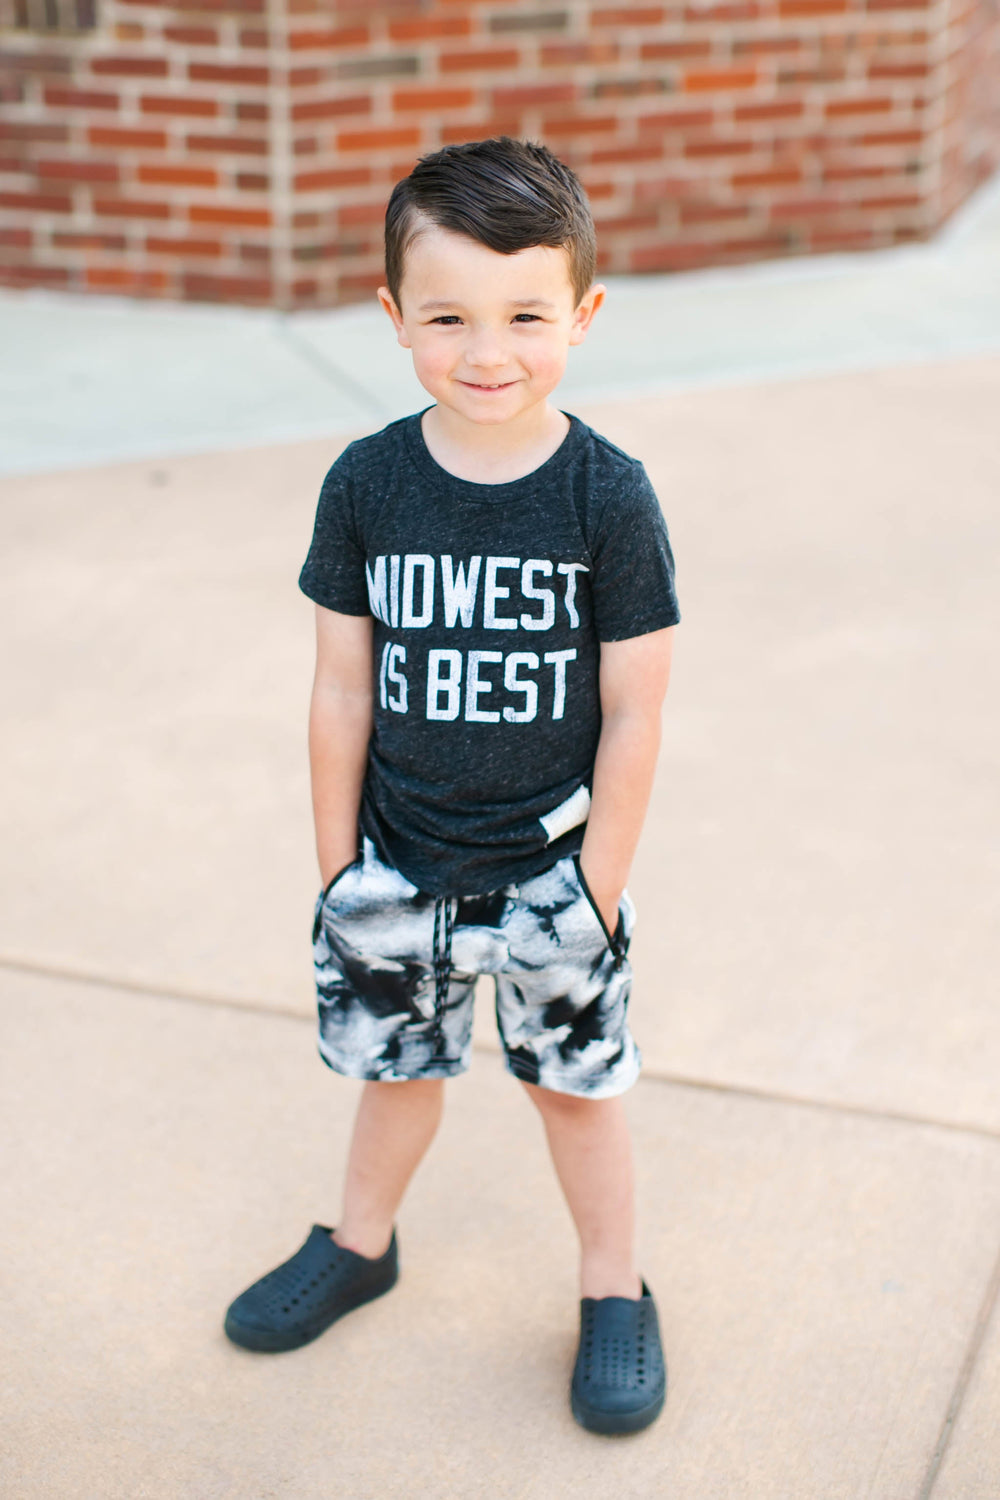 Midwest is best toddler tshirt